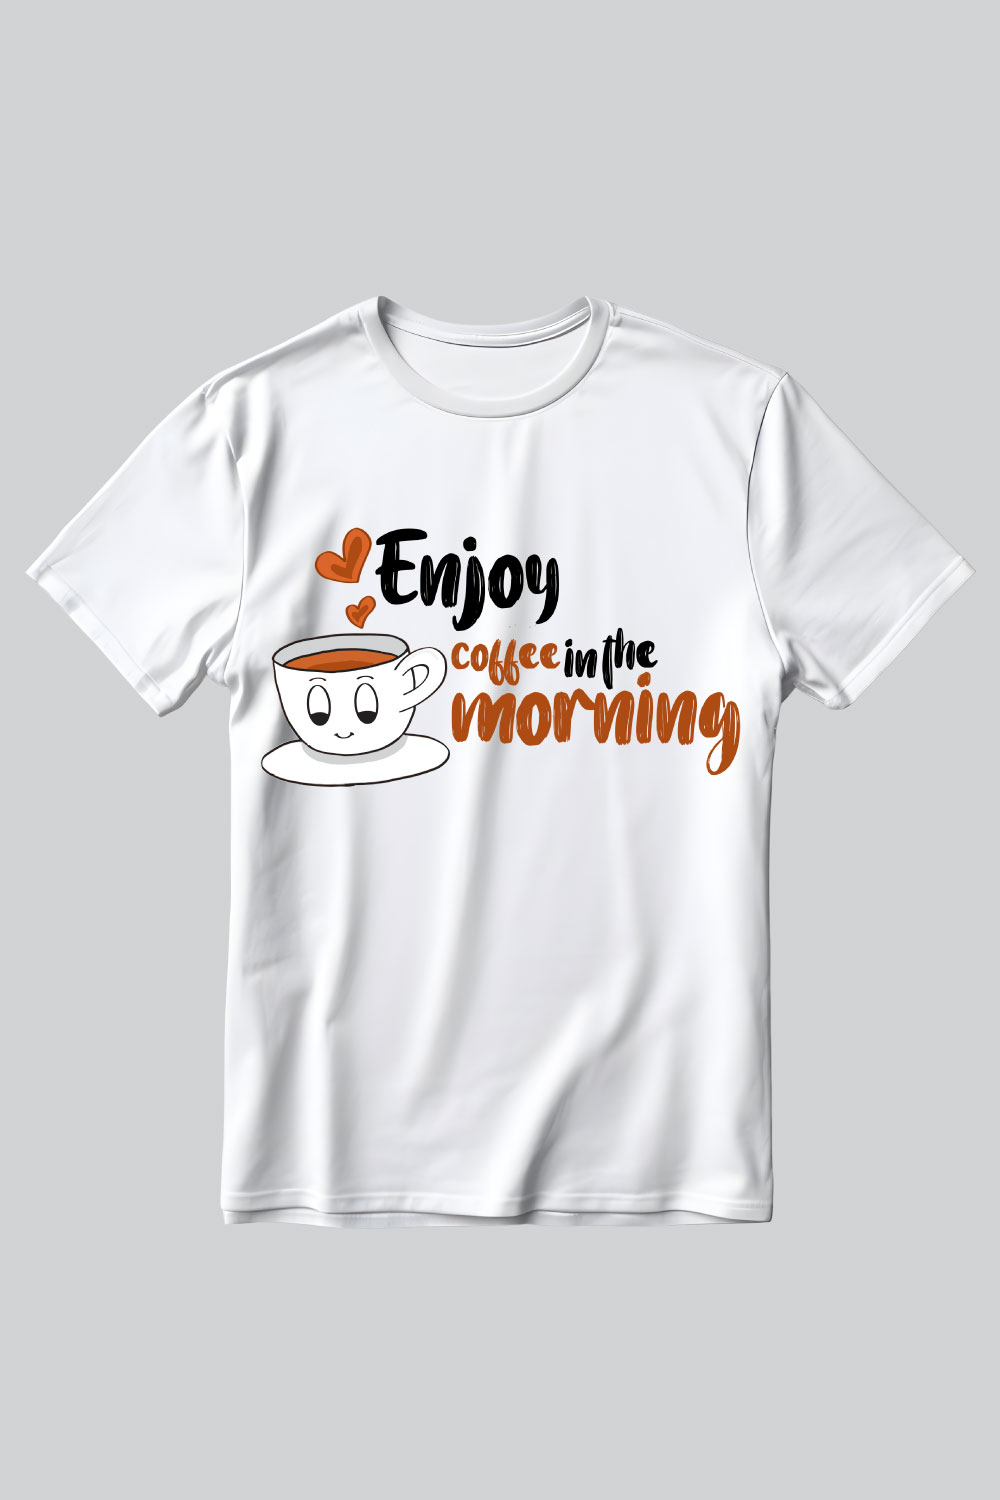 ENJOY COFFEE IN THE MORNING T-SHIRT DESIGN pinterest preview image.